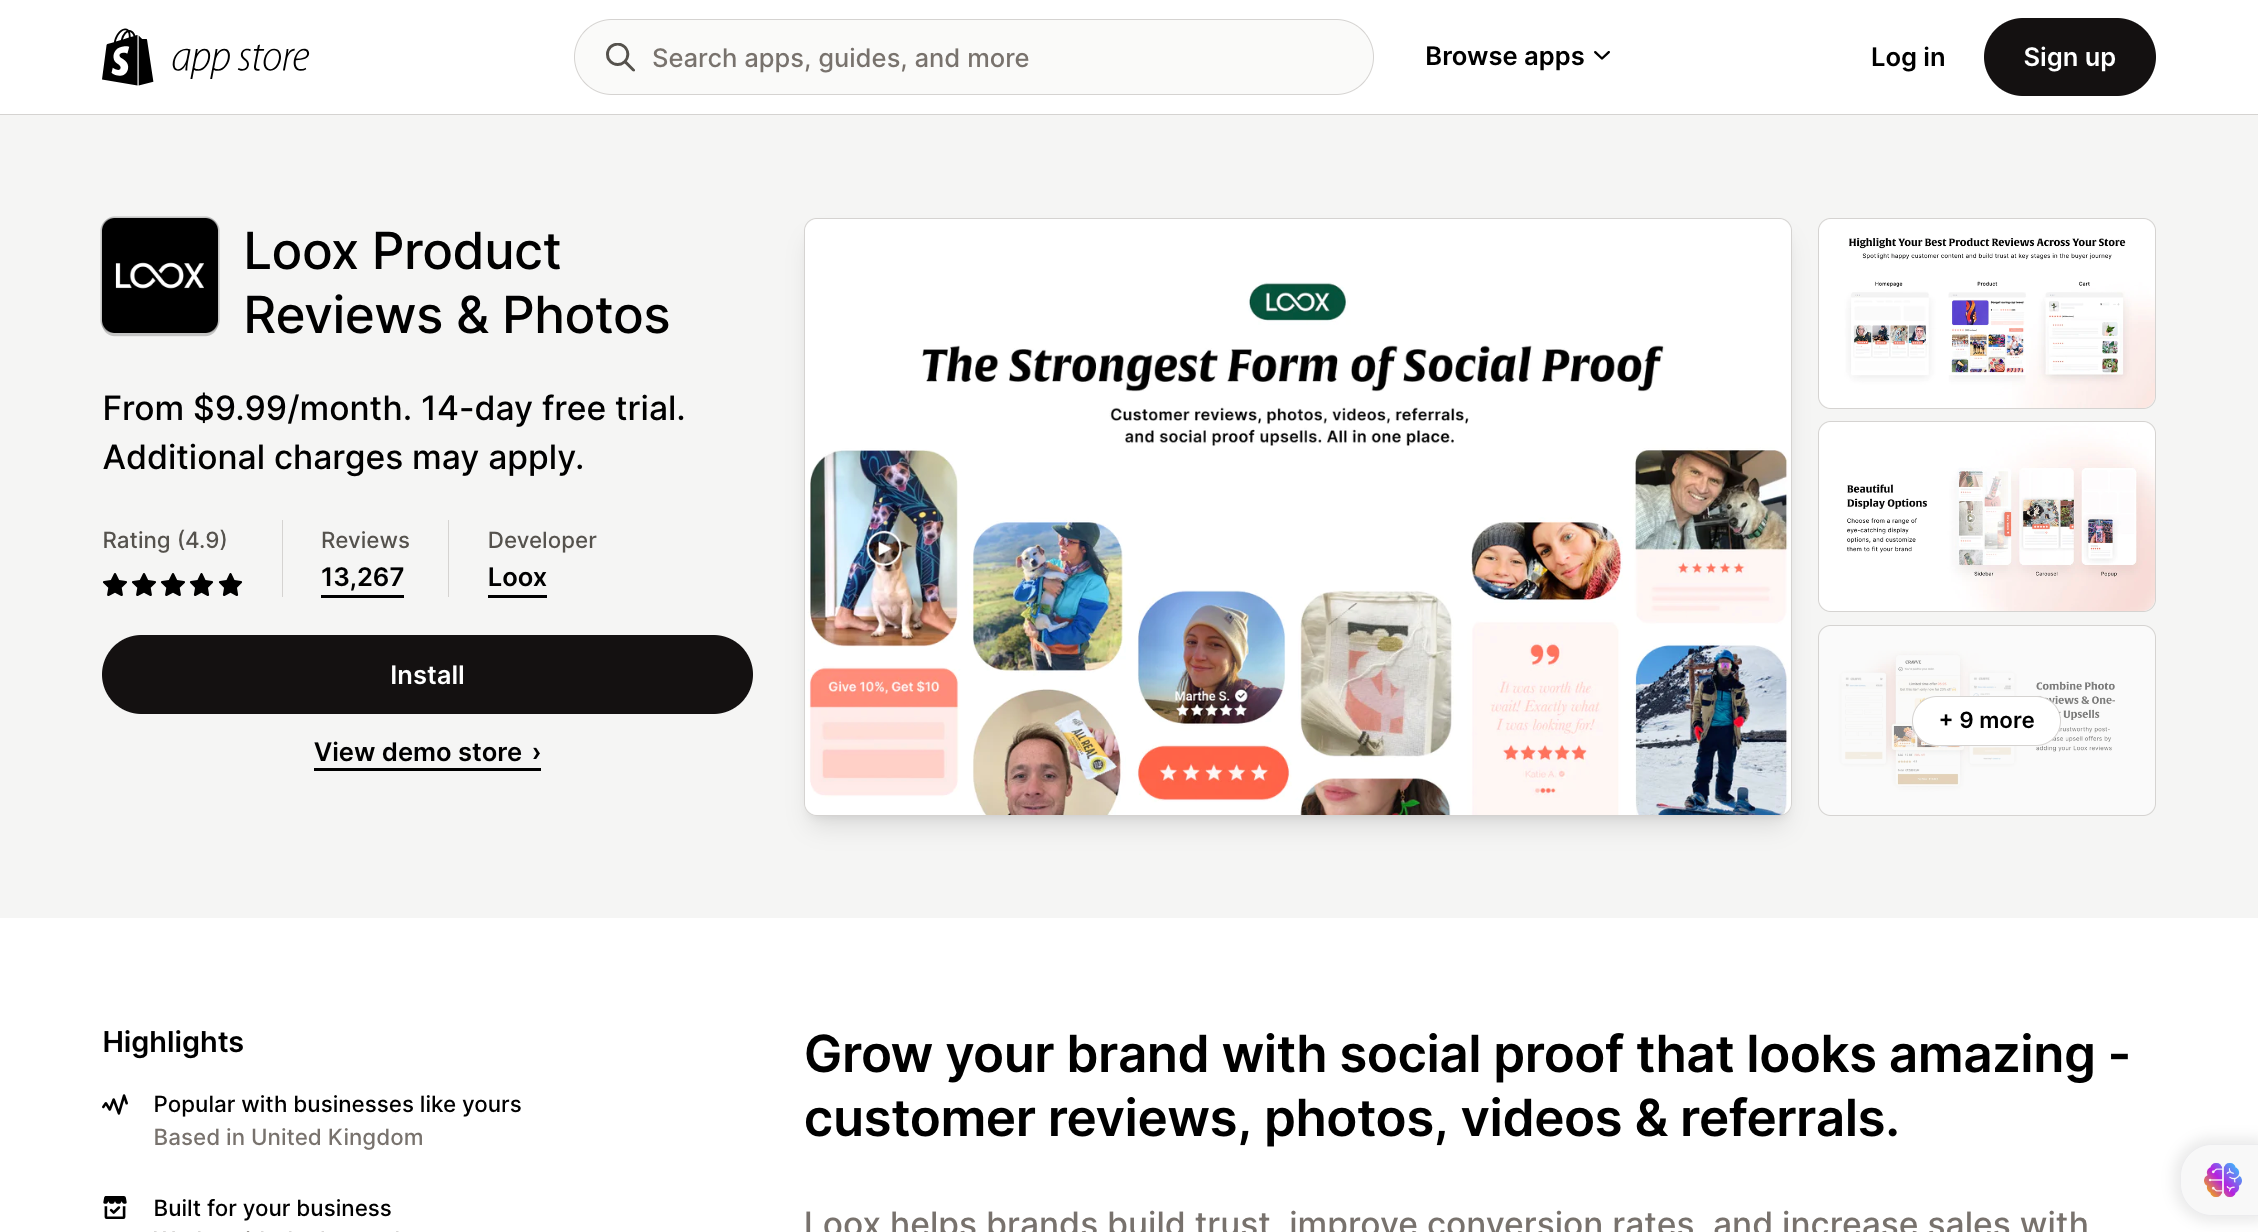 Loox-Product-Reviews-Photos-Loox-Shopify-Product-Reviews-UGC-Referrals-Upsells-Shopify-App-Store